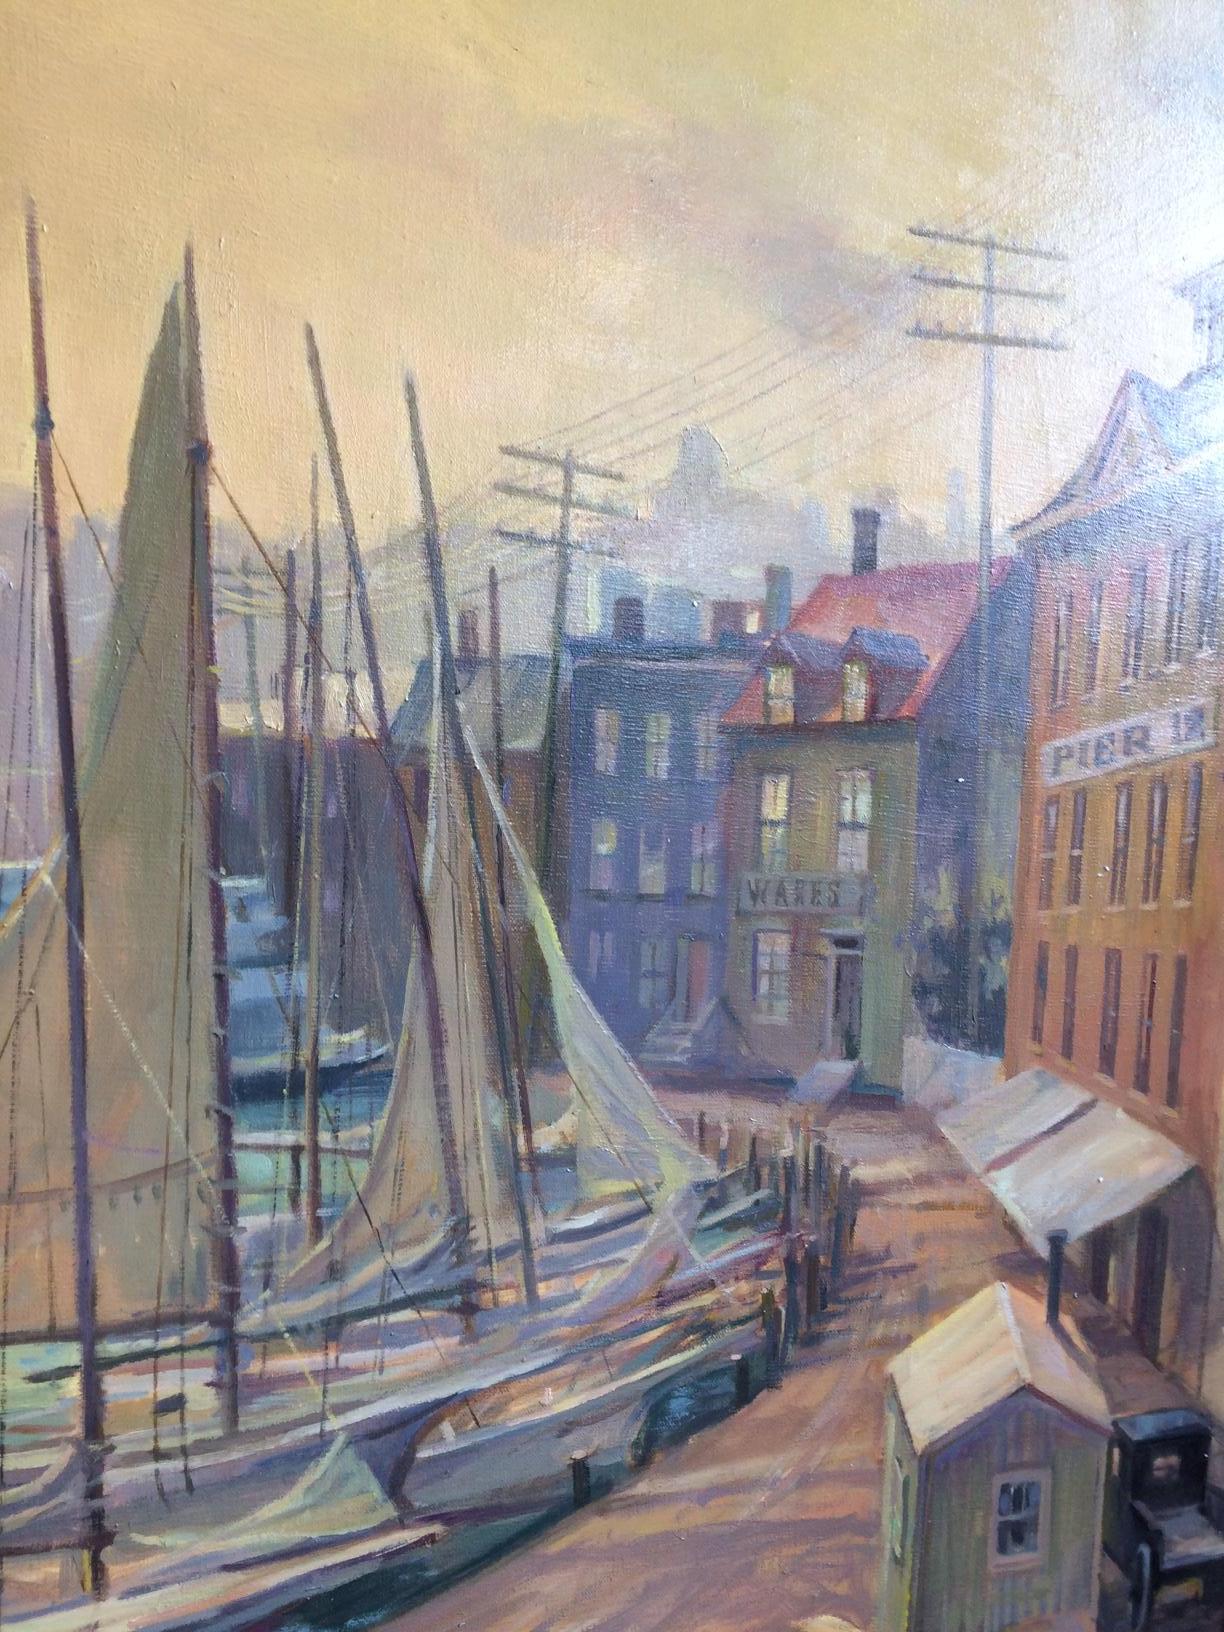  An historic masterpiece by artist Leonard Mizerek, fellow of the American Society of Marine Artists, this multi-faceted depiction of Baltimore's Pratt Street Wharf, the center of oyster harvesting in the 1900s, is bustling with activity as the